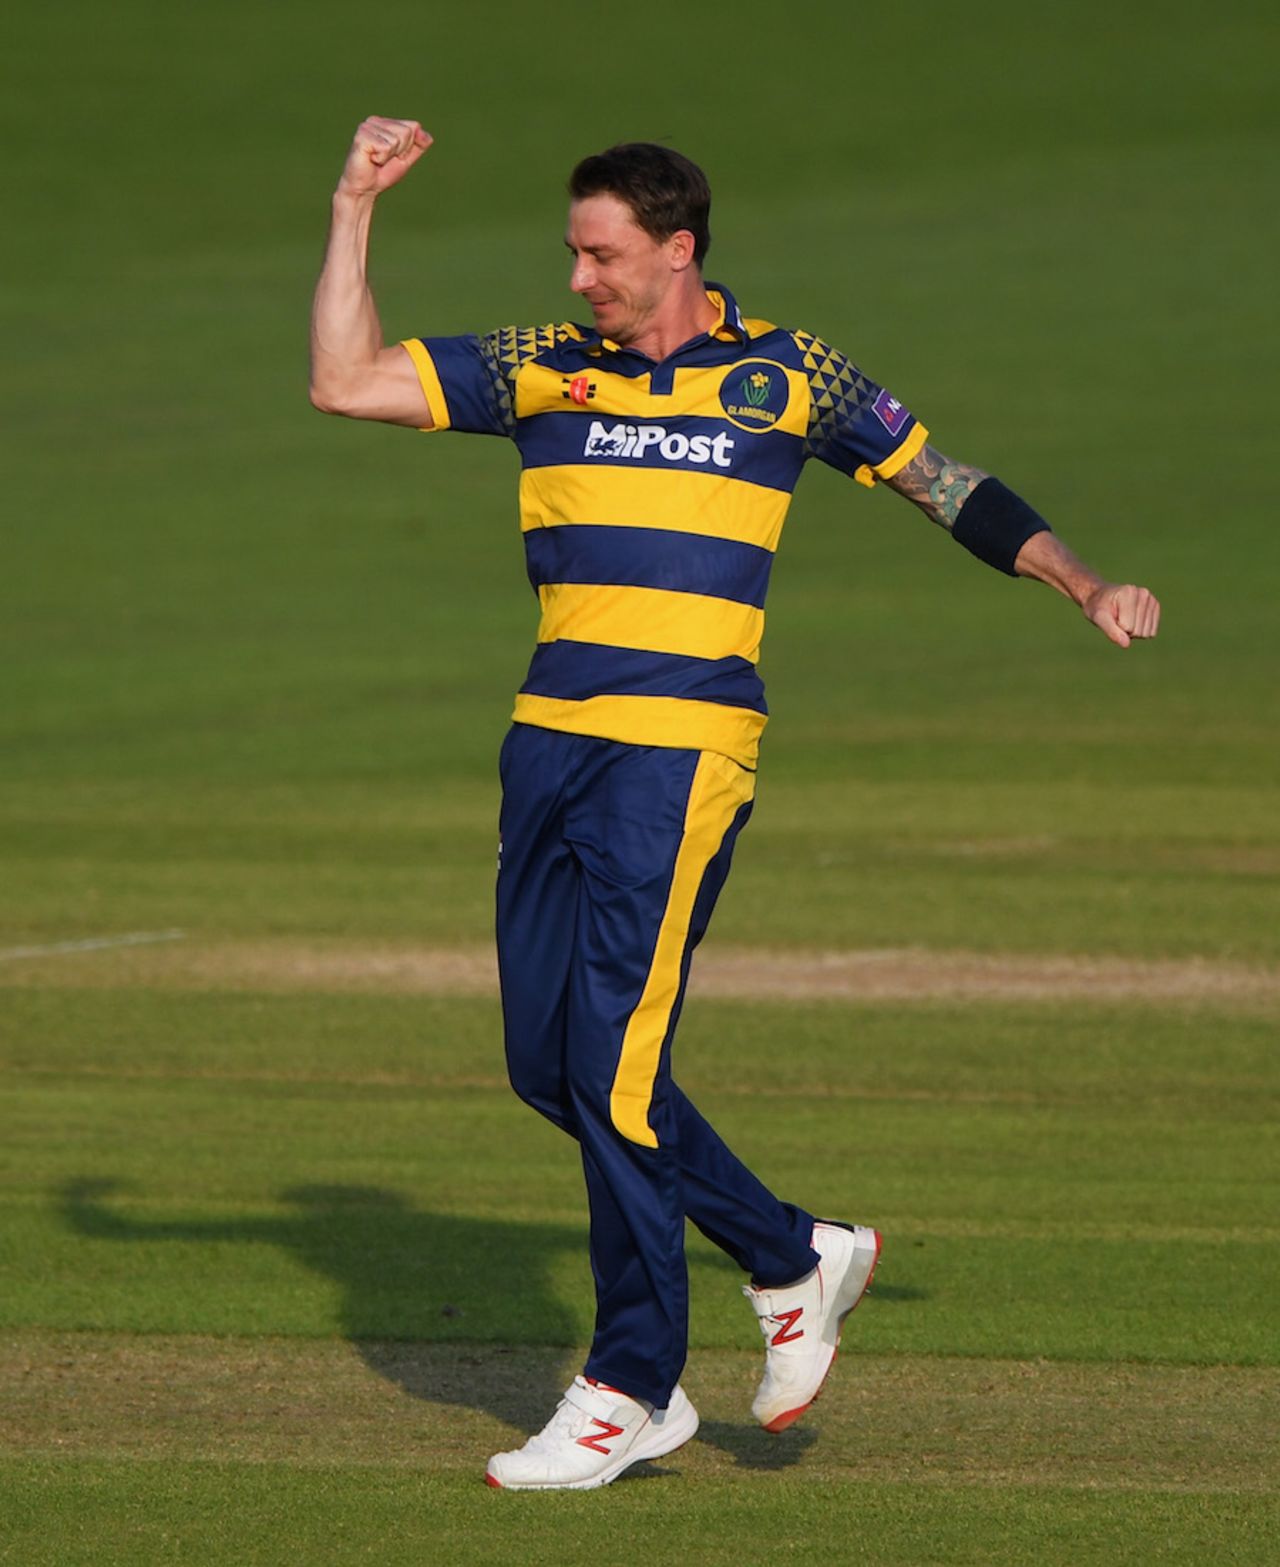 Dale Steyn collected 3 for 22, Glamorgan v Hampshire, NatWest T20 Blast, South Group, Cardiff, June 3, 2016